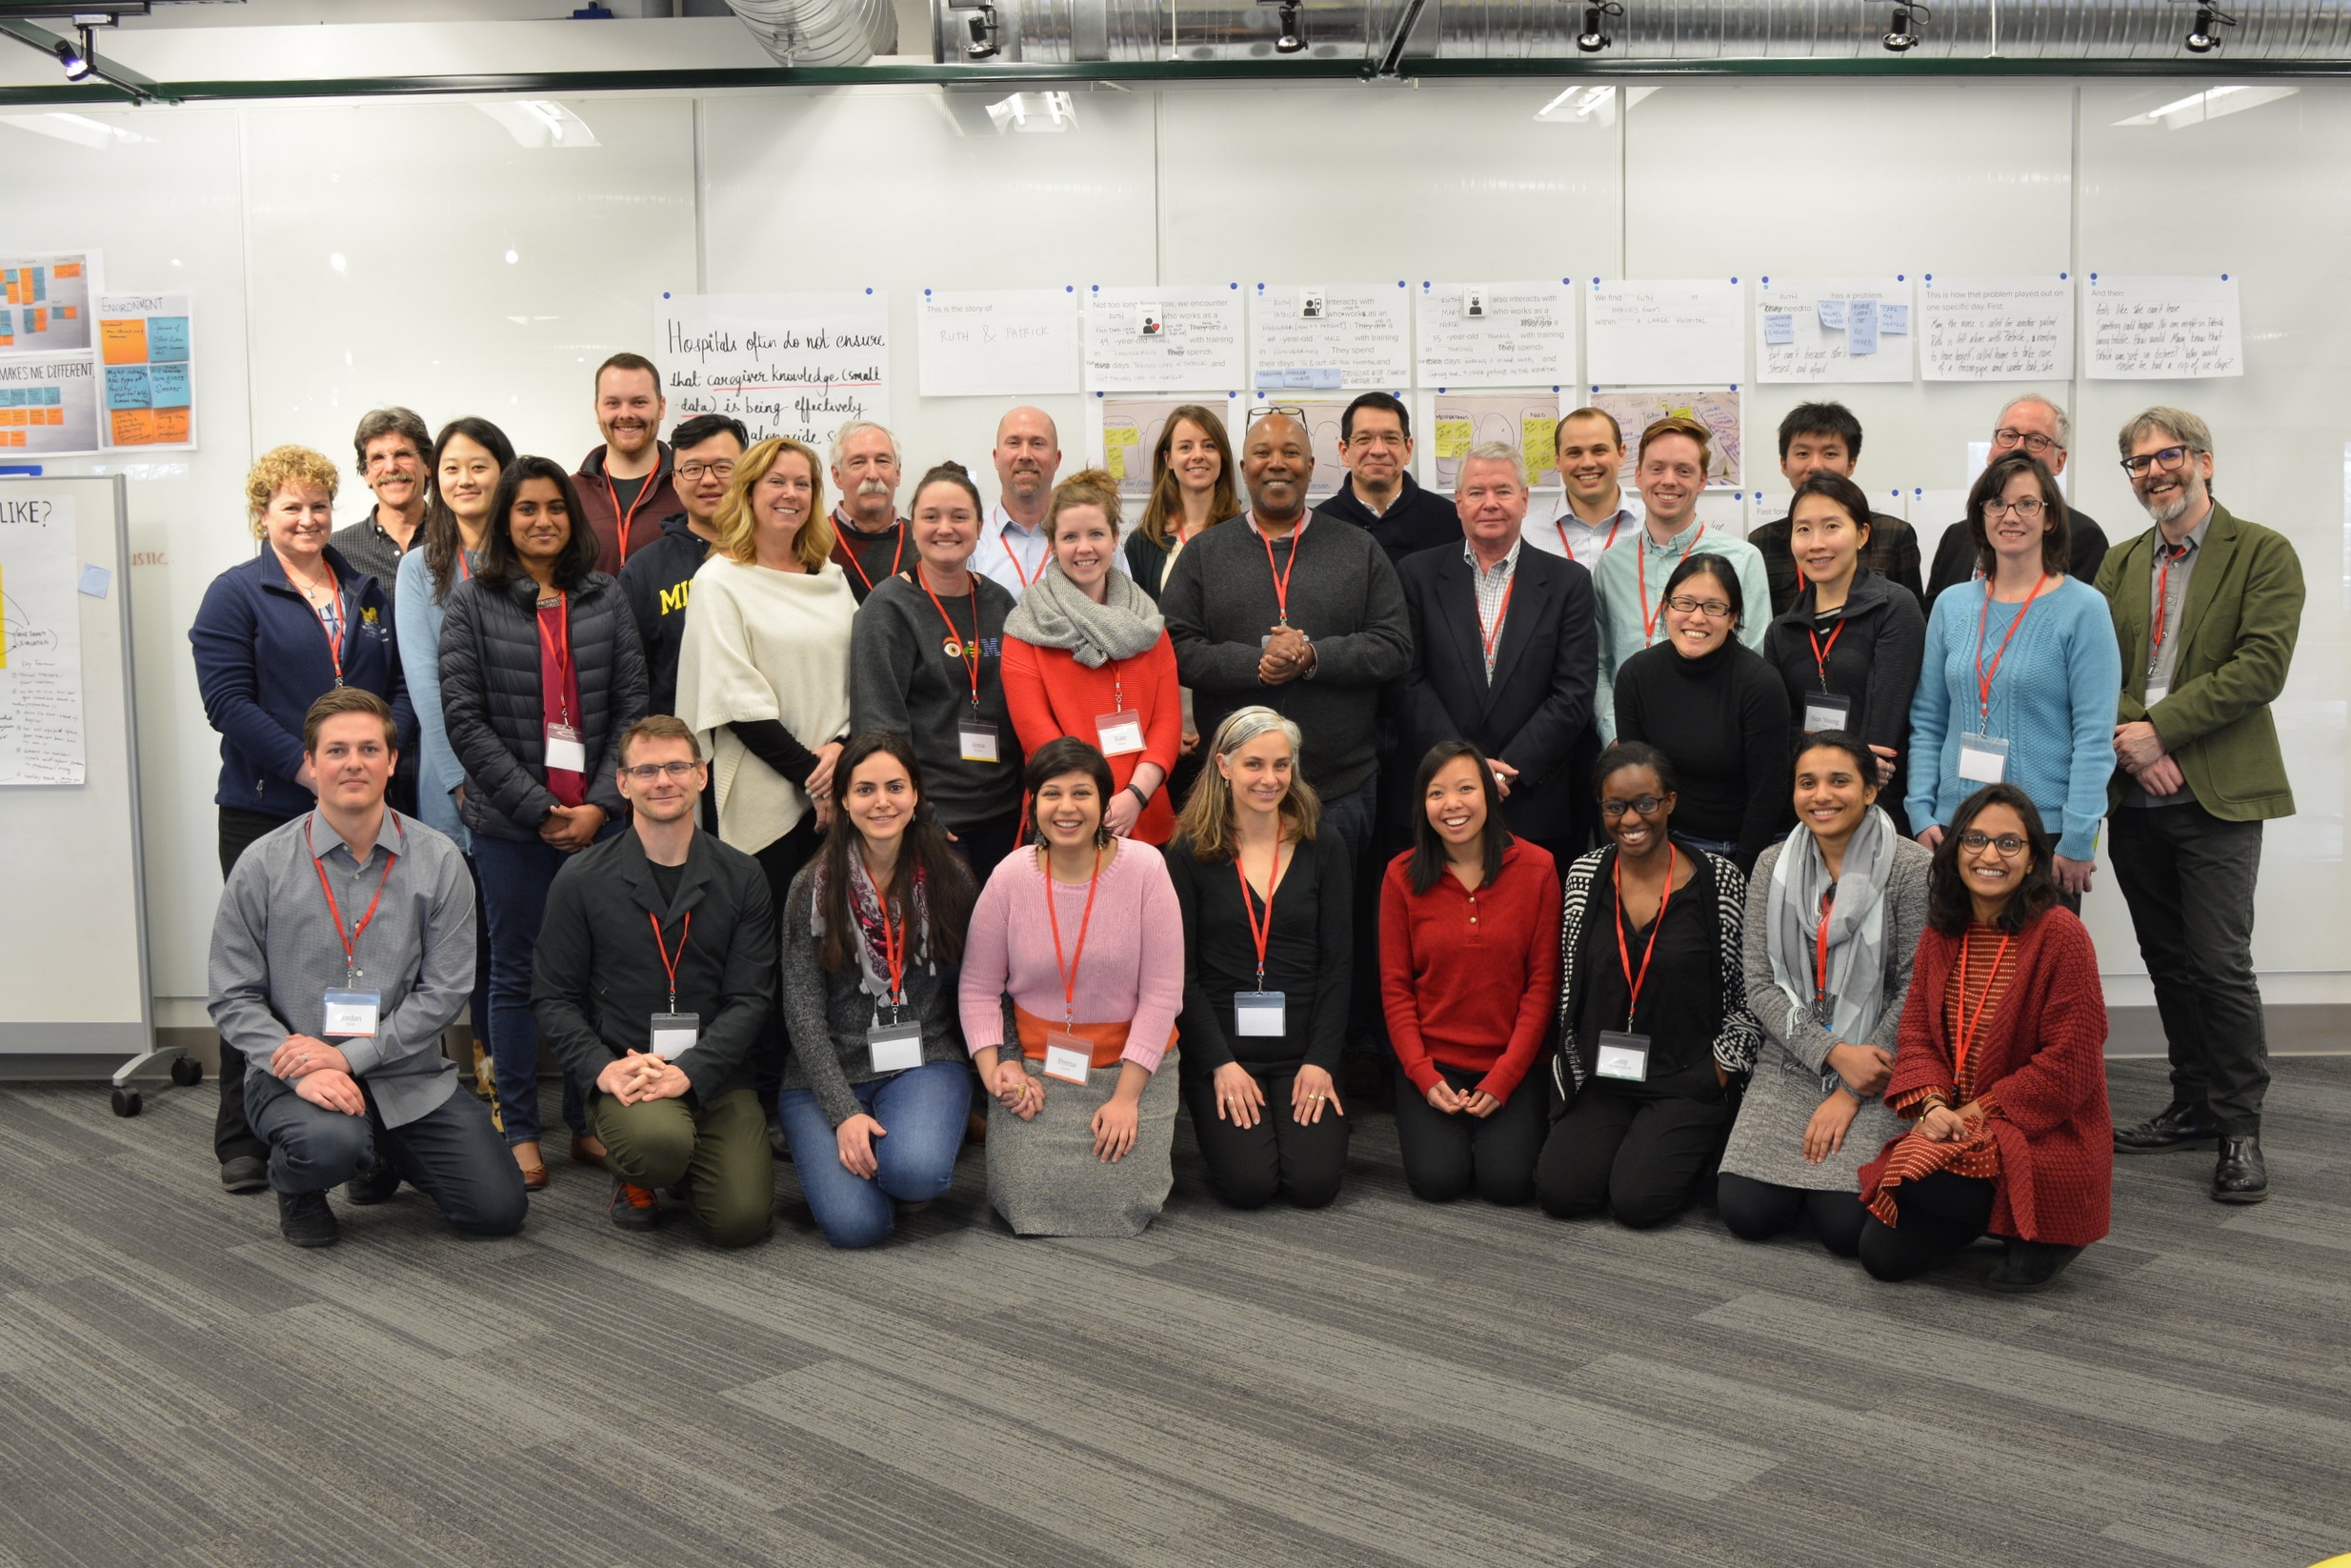 End of day-two group picture with all the participants who took part in the design charette.